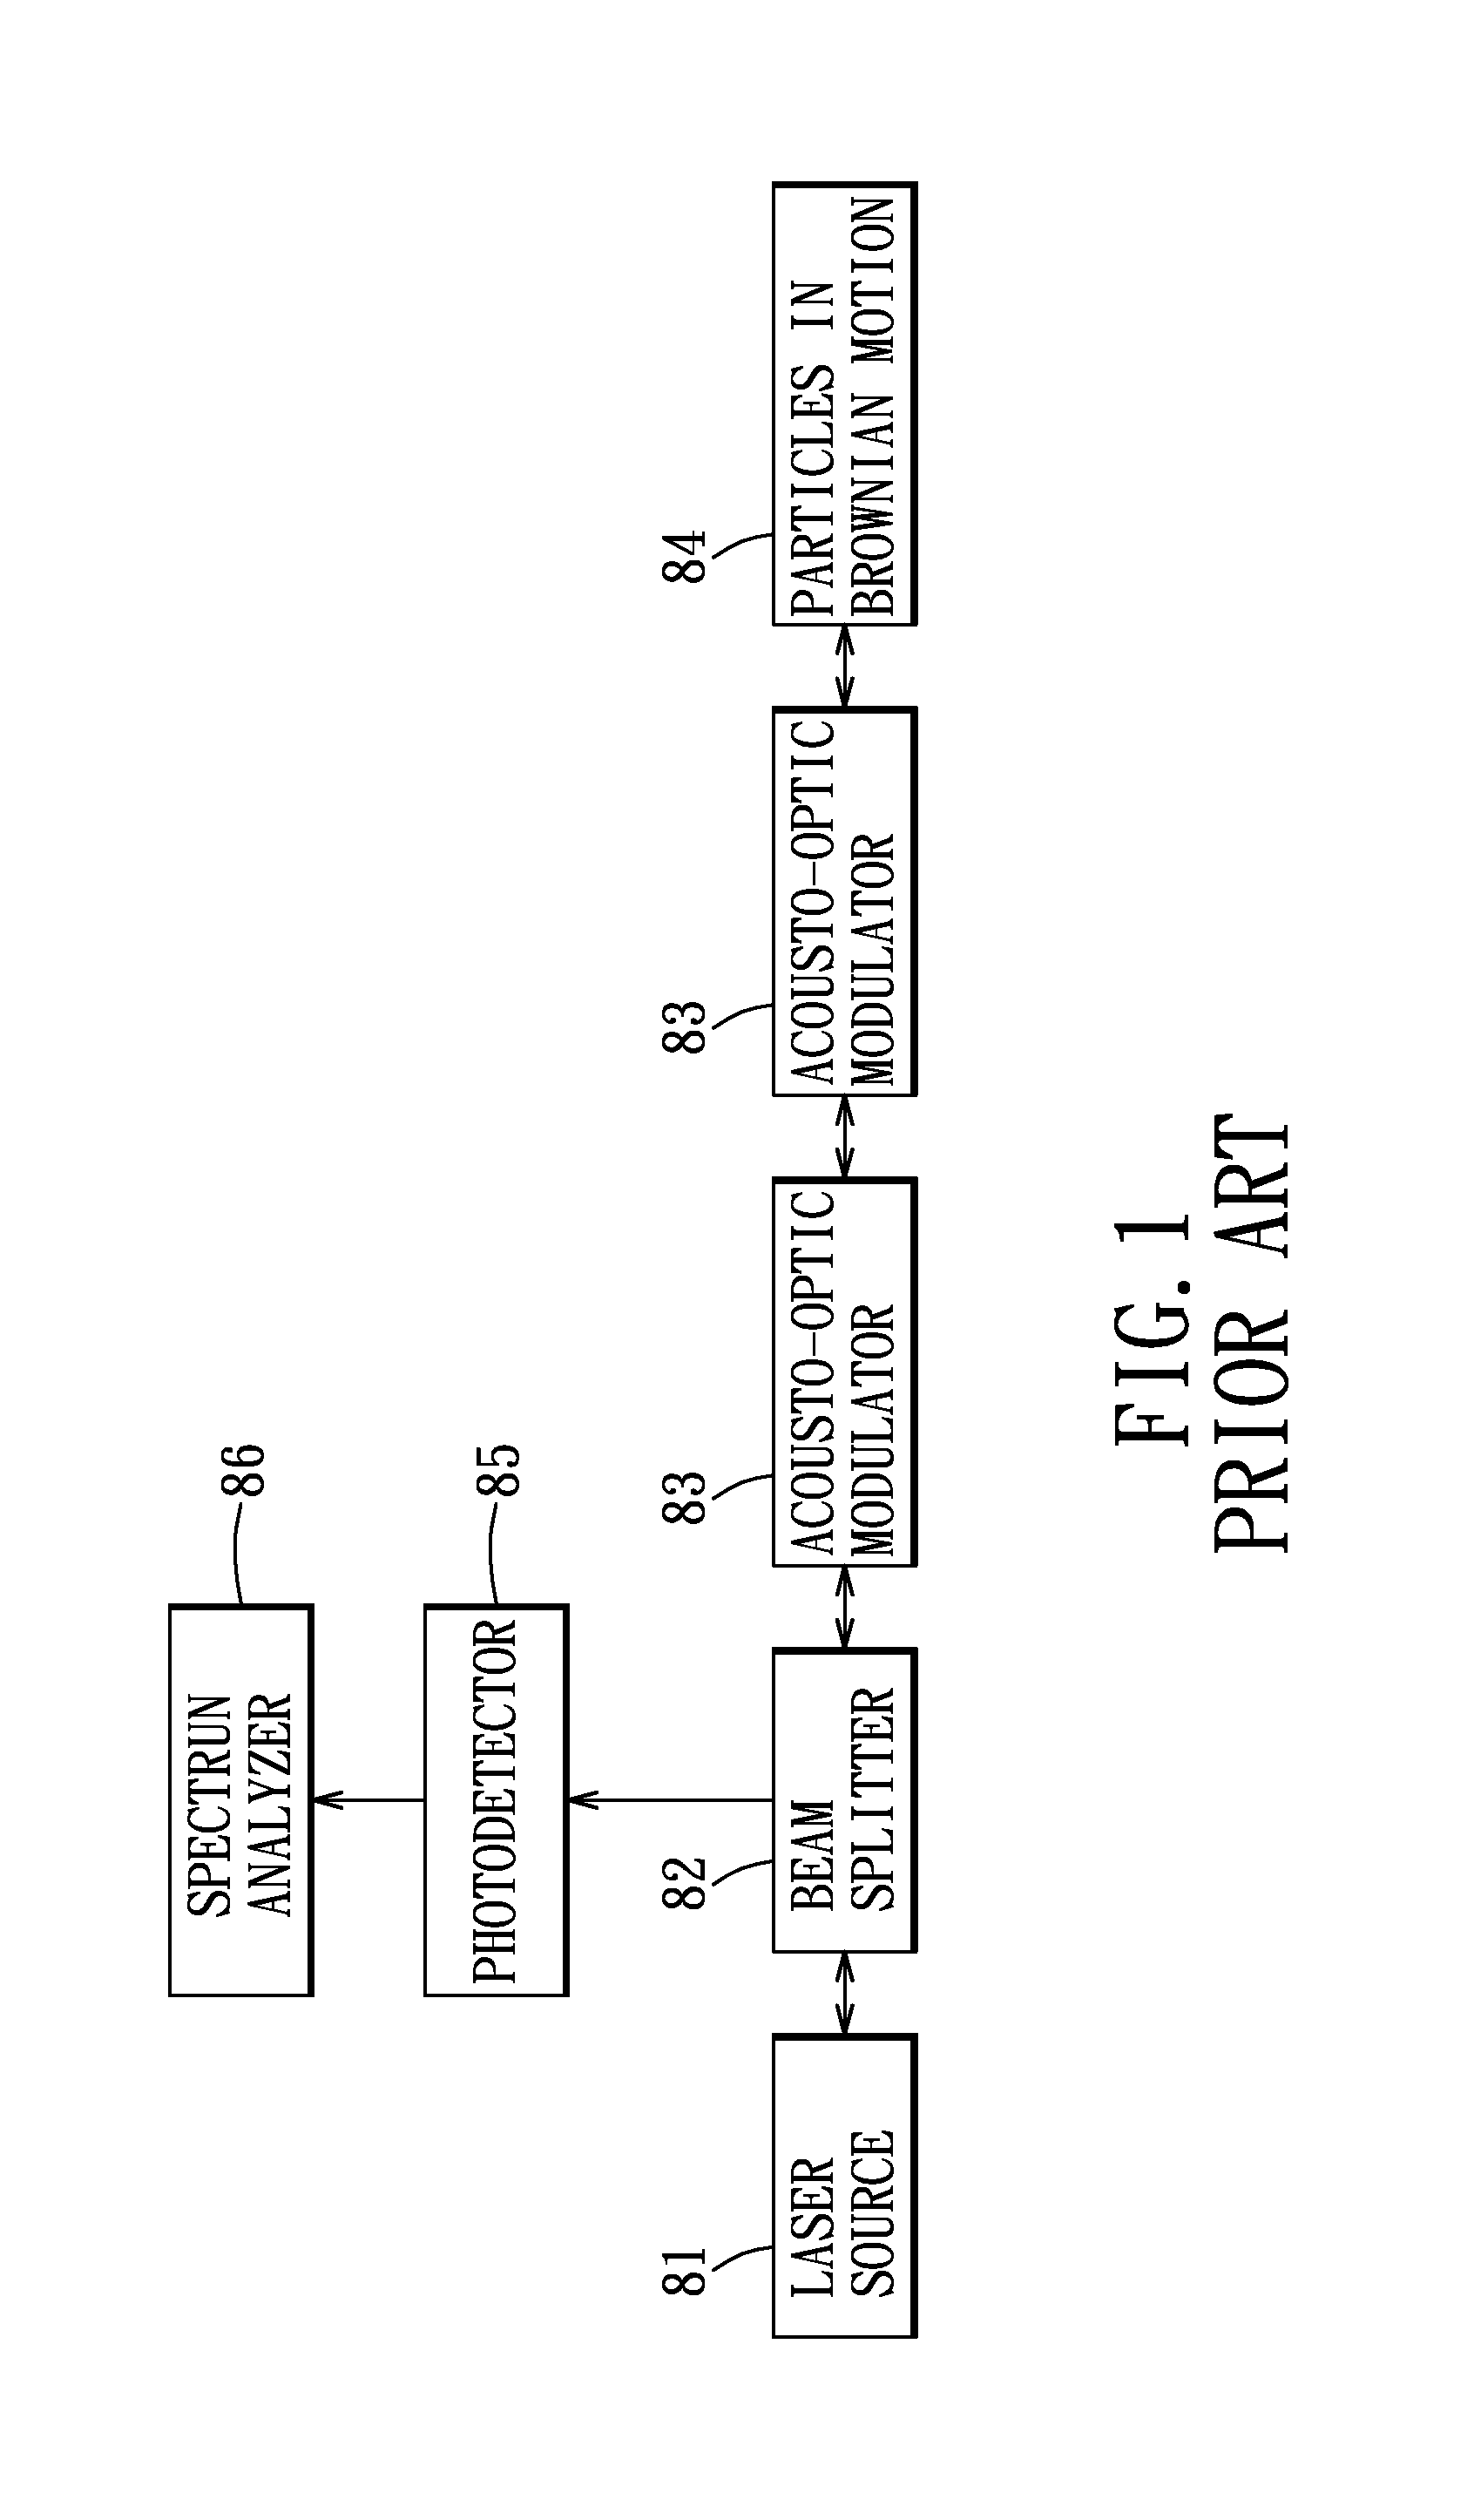 Localized dynamic light scattering system with doppler velocity measuring capability